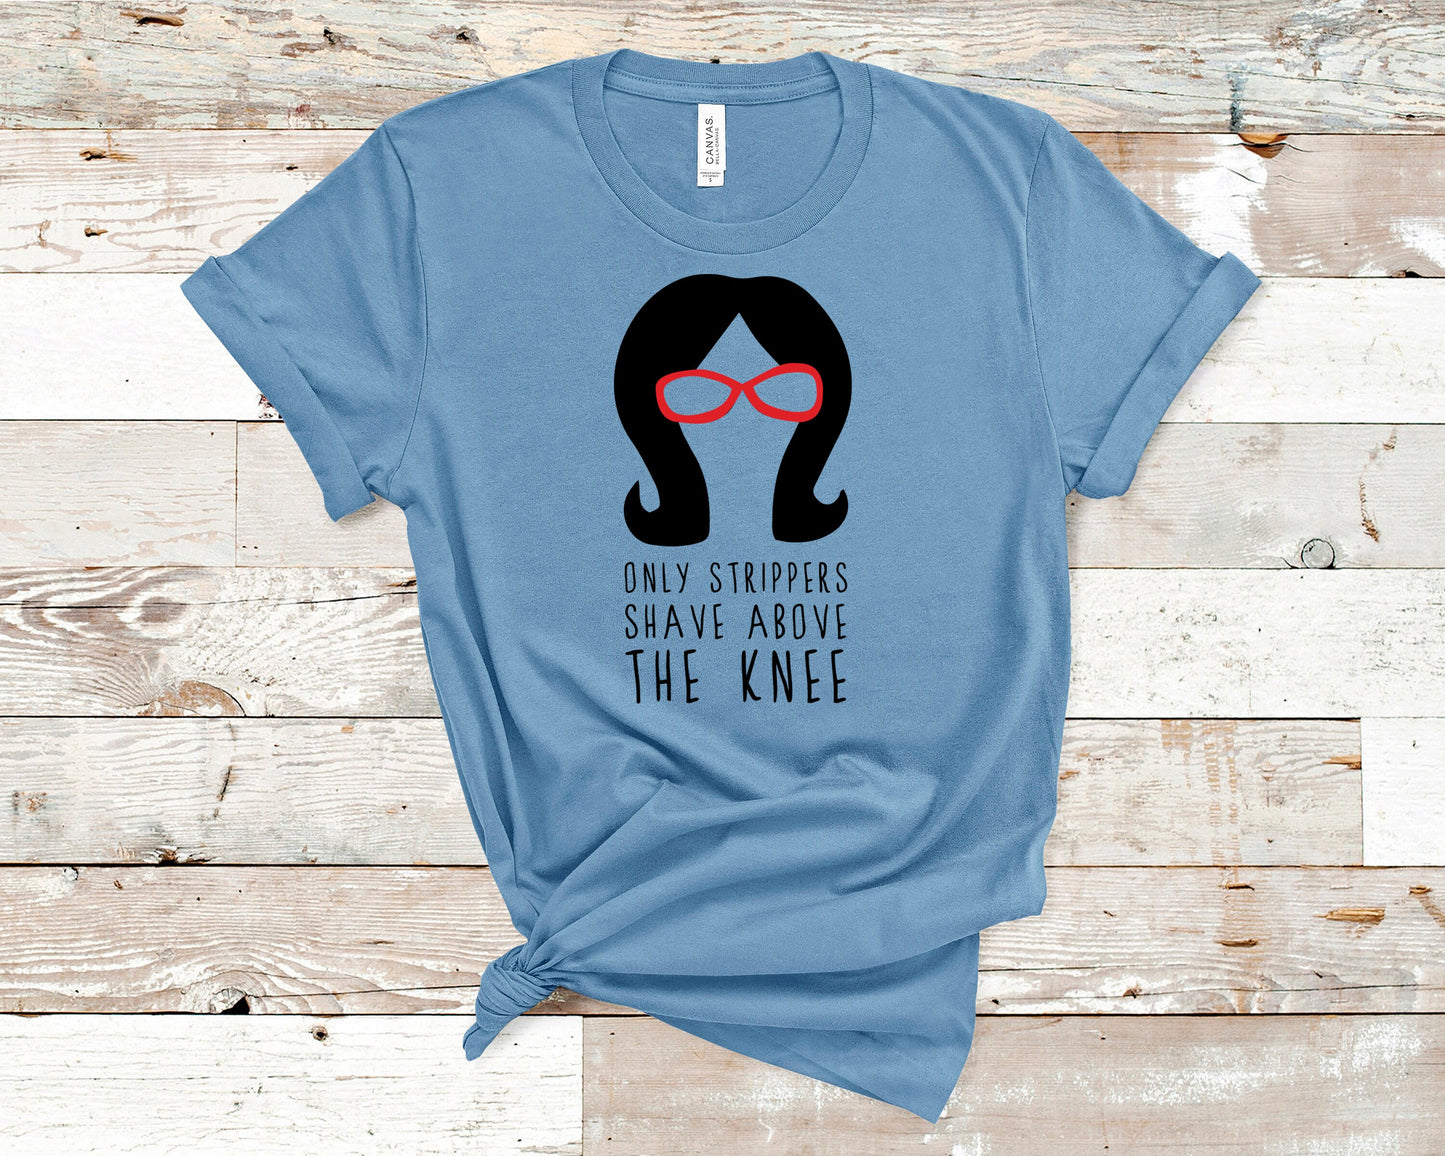 Linda Belcher - Bobs Burgers Fan - Only Strippers Shaved Above The Knee Tee- Unisex Adults - Funny Gift